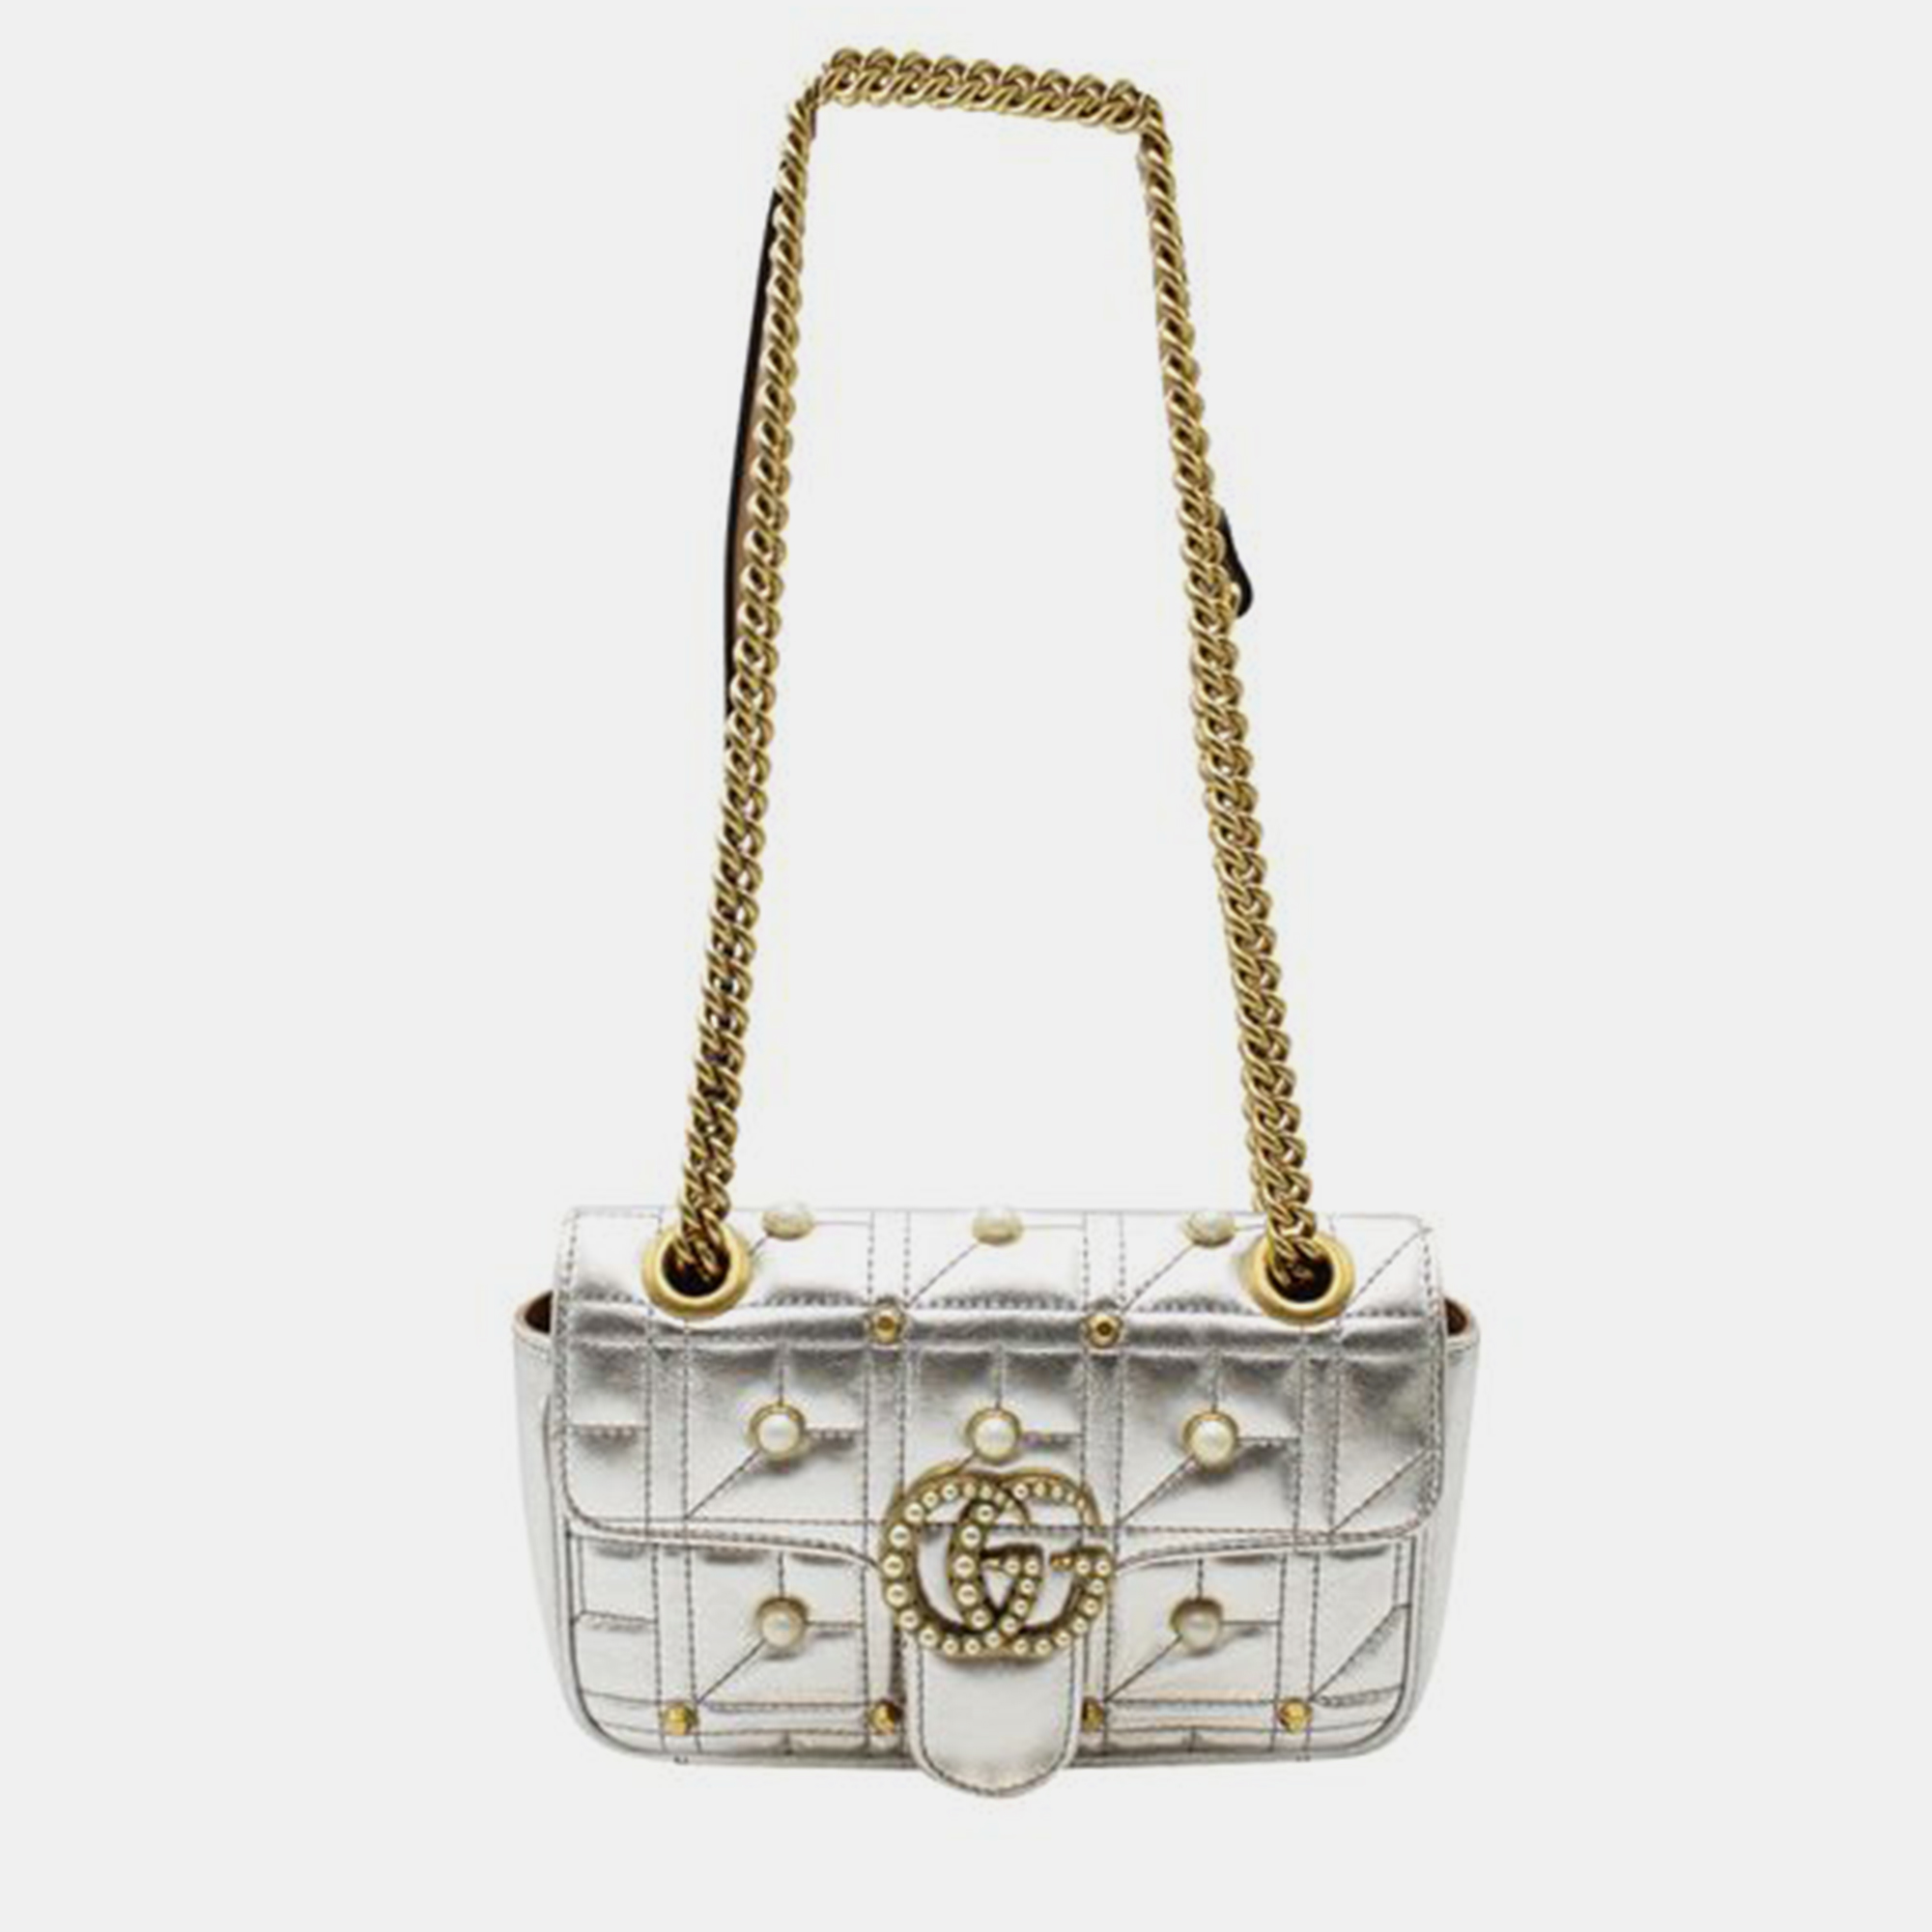 GUCCI Pearly GG Marmont Mini Flap Bag Embellished Matelasse Leather SHOULDER BAGS